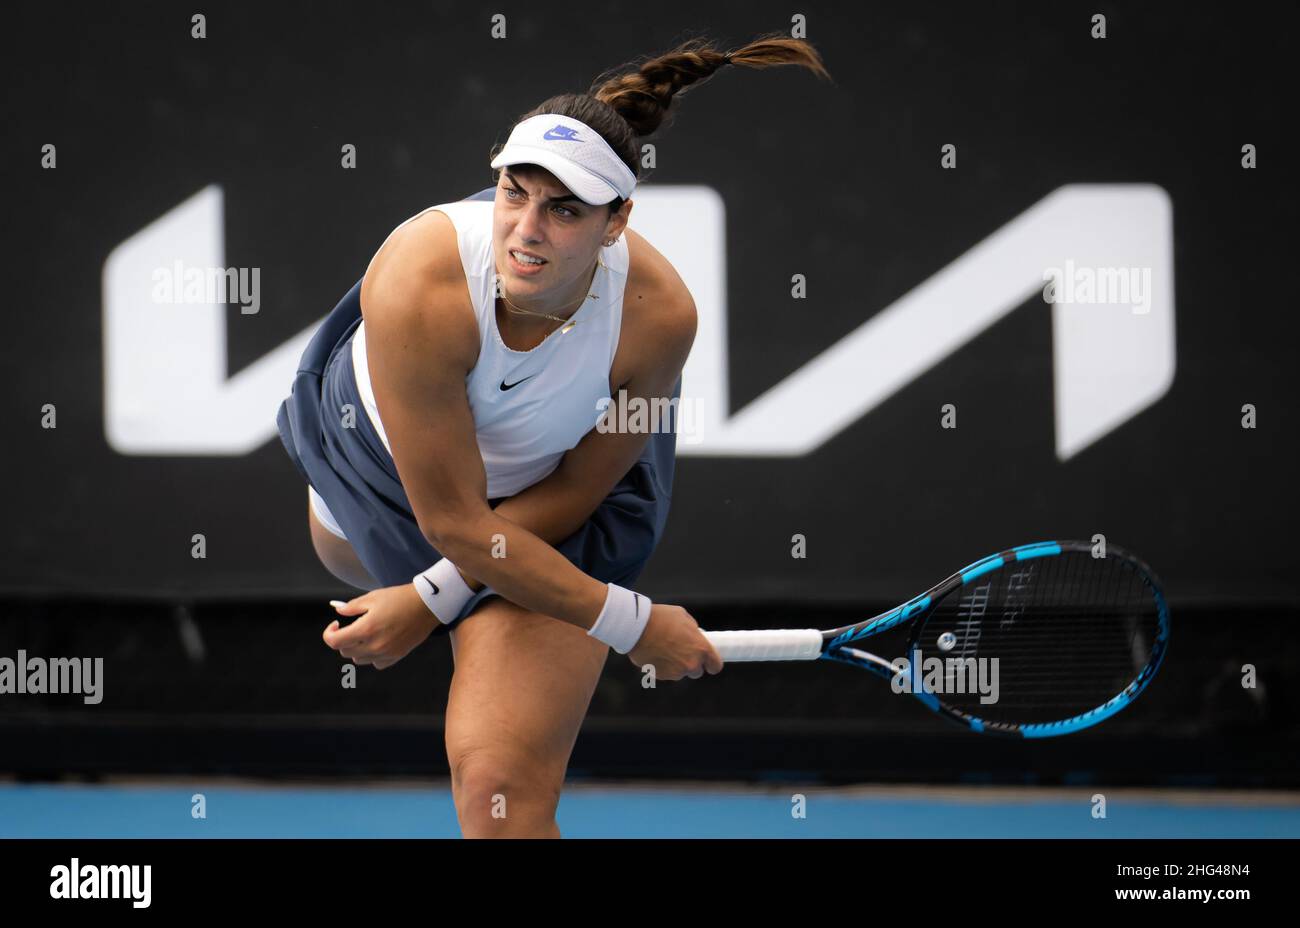 18th January 2022. Ana Konjuh of Croatia in action against Shelby Rogers of United States during the first round of the 2022 Australian Open, WTA Grand Slam tennis tournament on January 18, 2022 at Melbourne Park in Melbourne, Australia - Photo: Rob Prange/DPPI/LiveMedia Credit: Independent Photo Agency/Alamy Live News Stock Photo